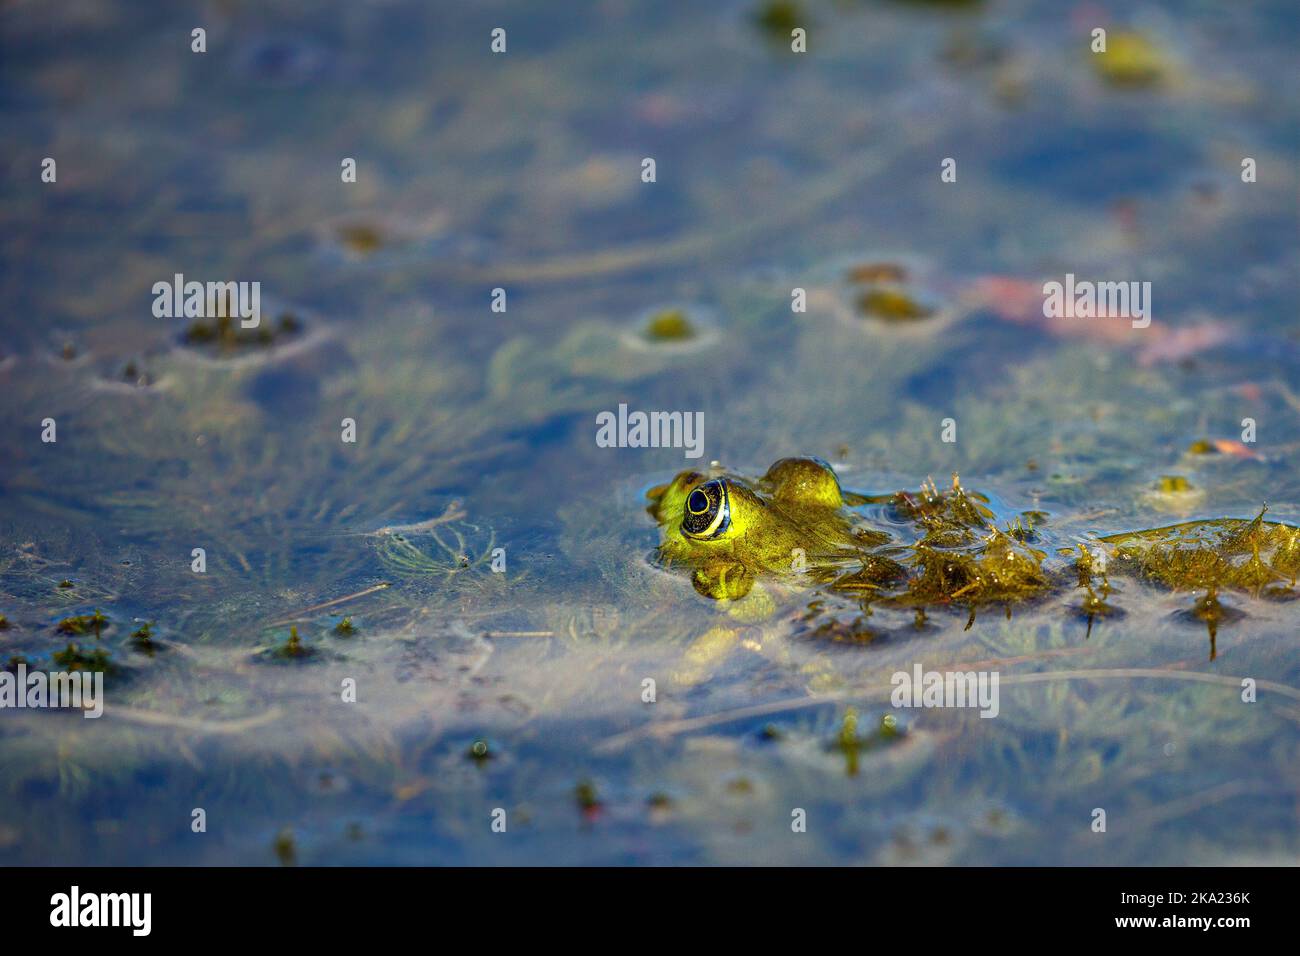 A frog in the swamps of the danube delta Stock Photo